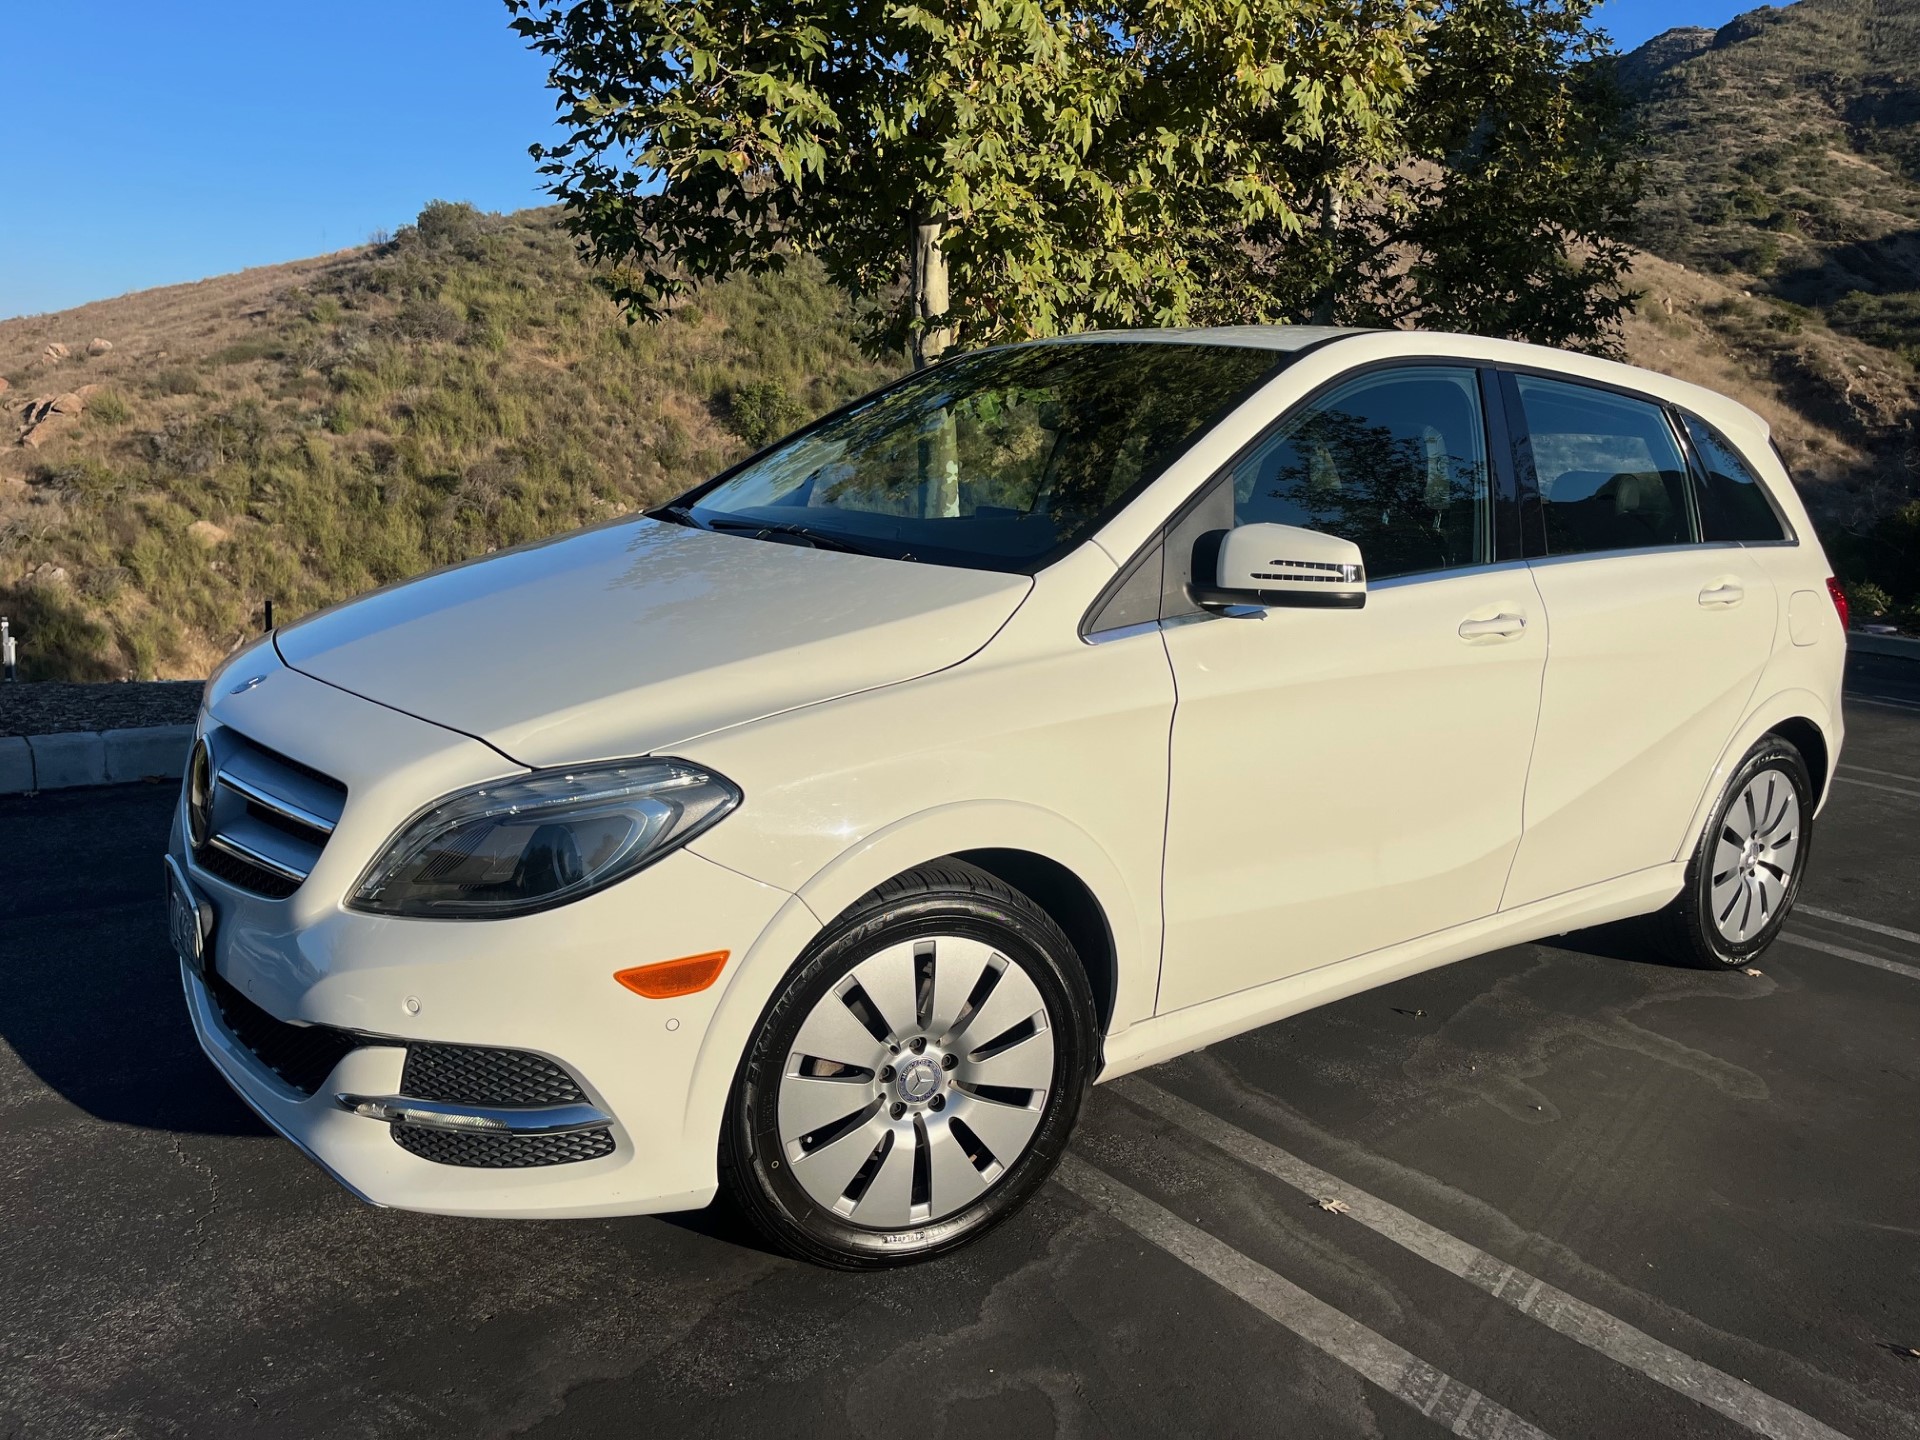 Used Mercedes-Benz B-Class Cars for Sale Right Now - Autotrader